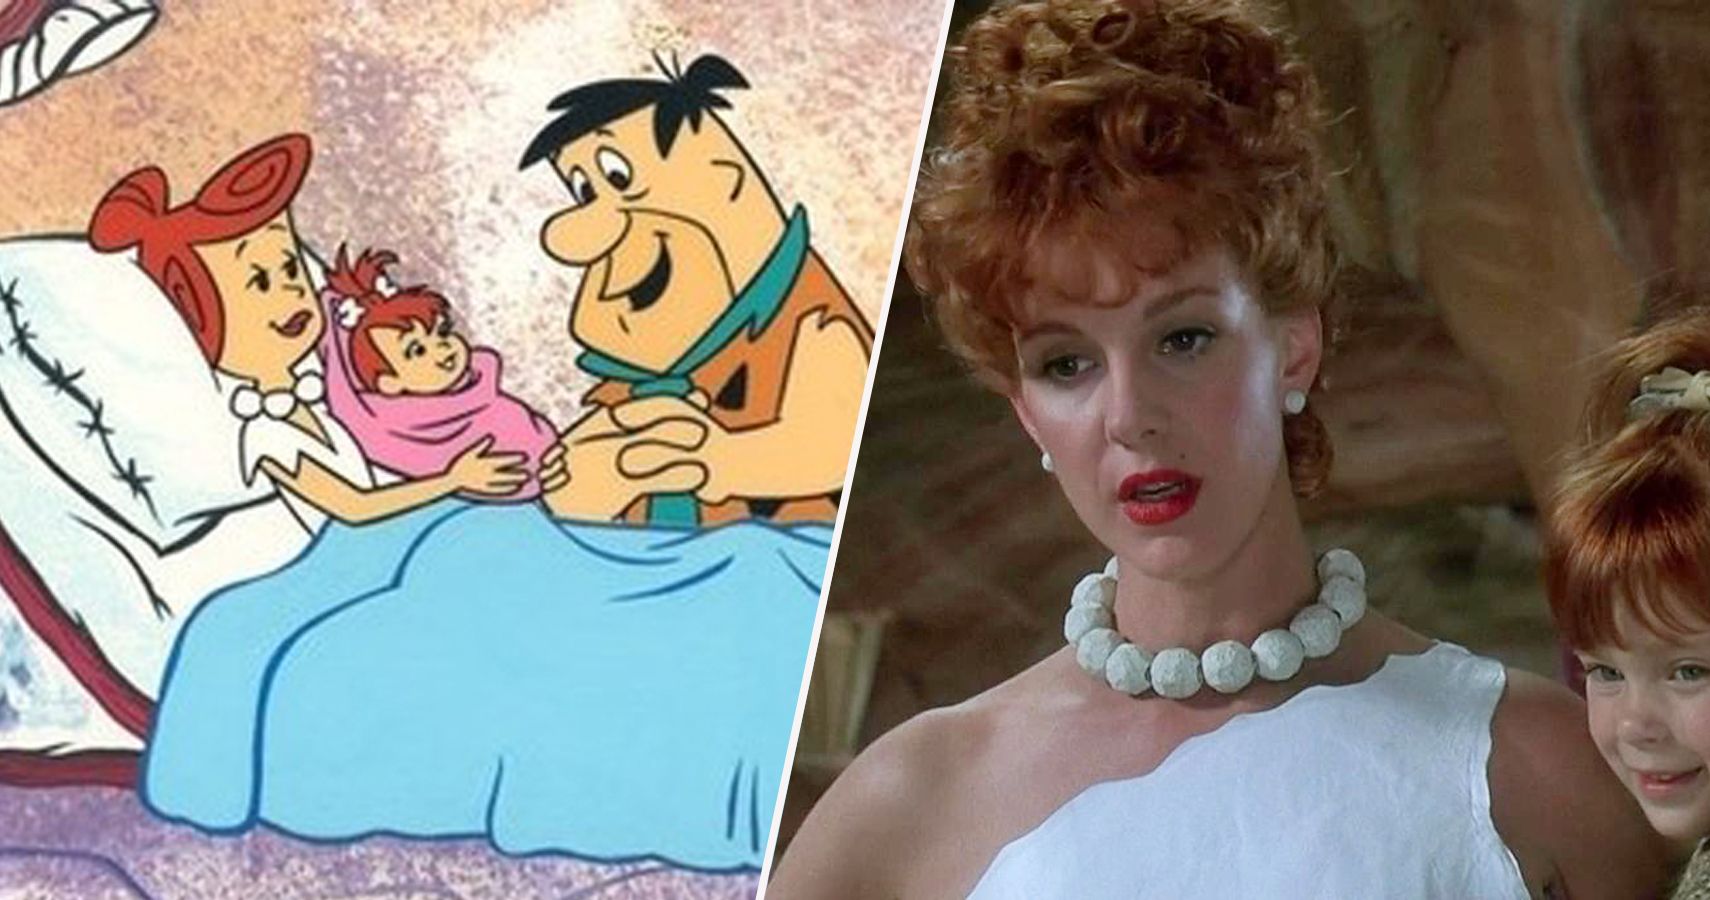 who played wilma in the flintstones movie